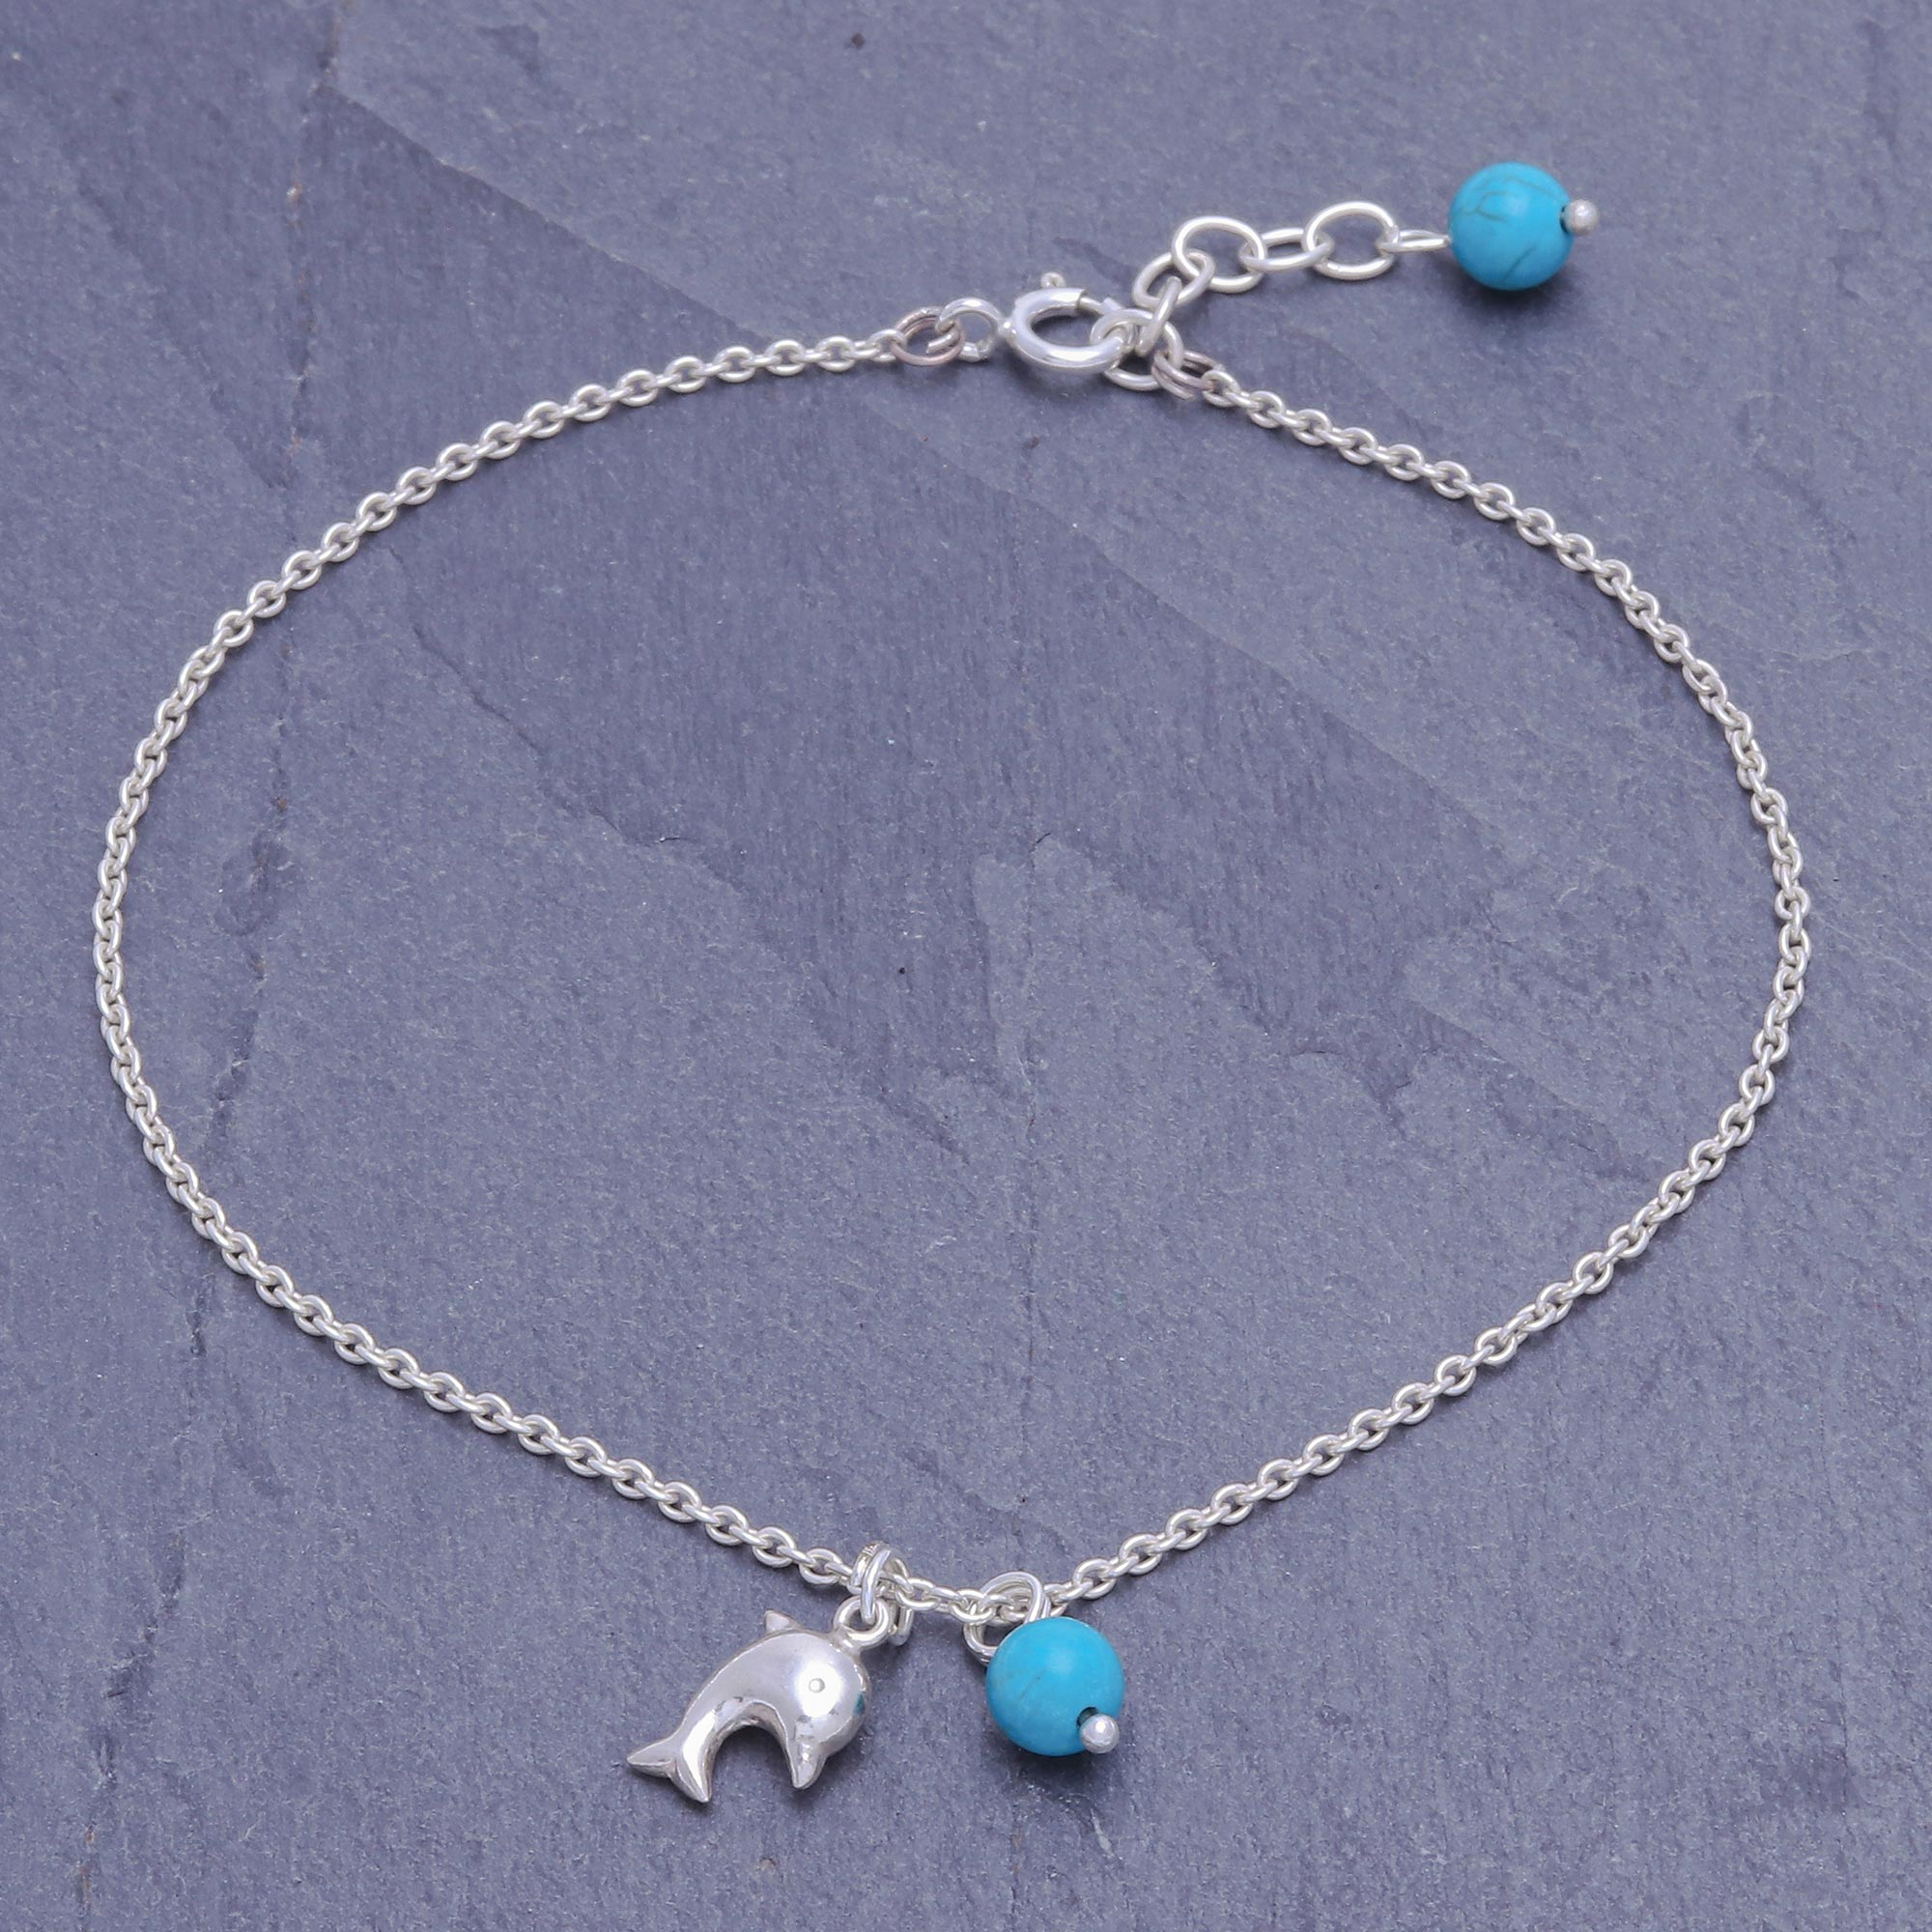 Pretty Dophin Charm anklet bracelet ankle chain Silver dangly charms